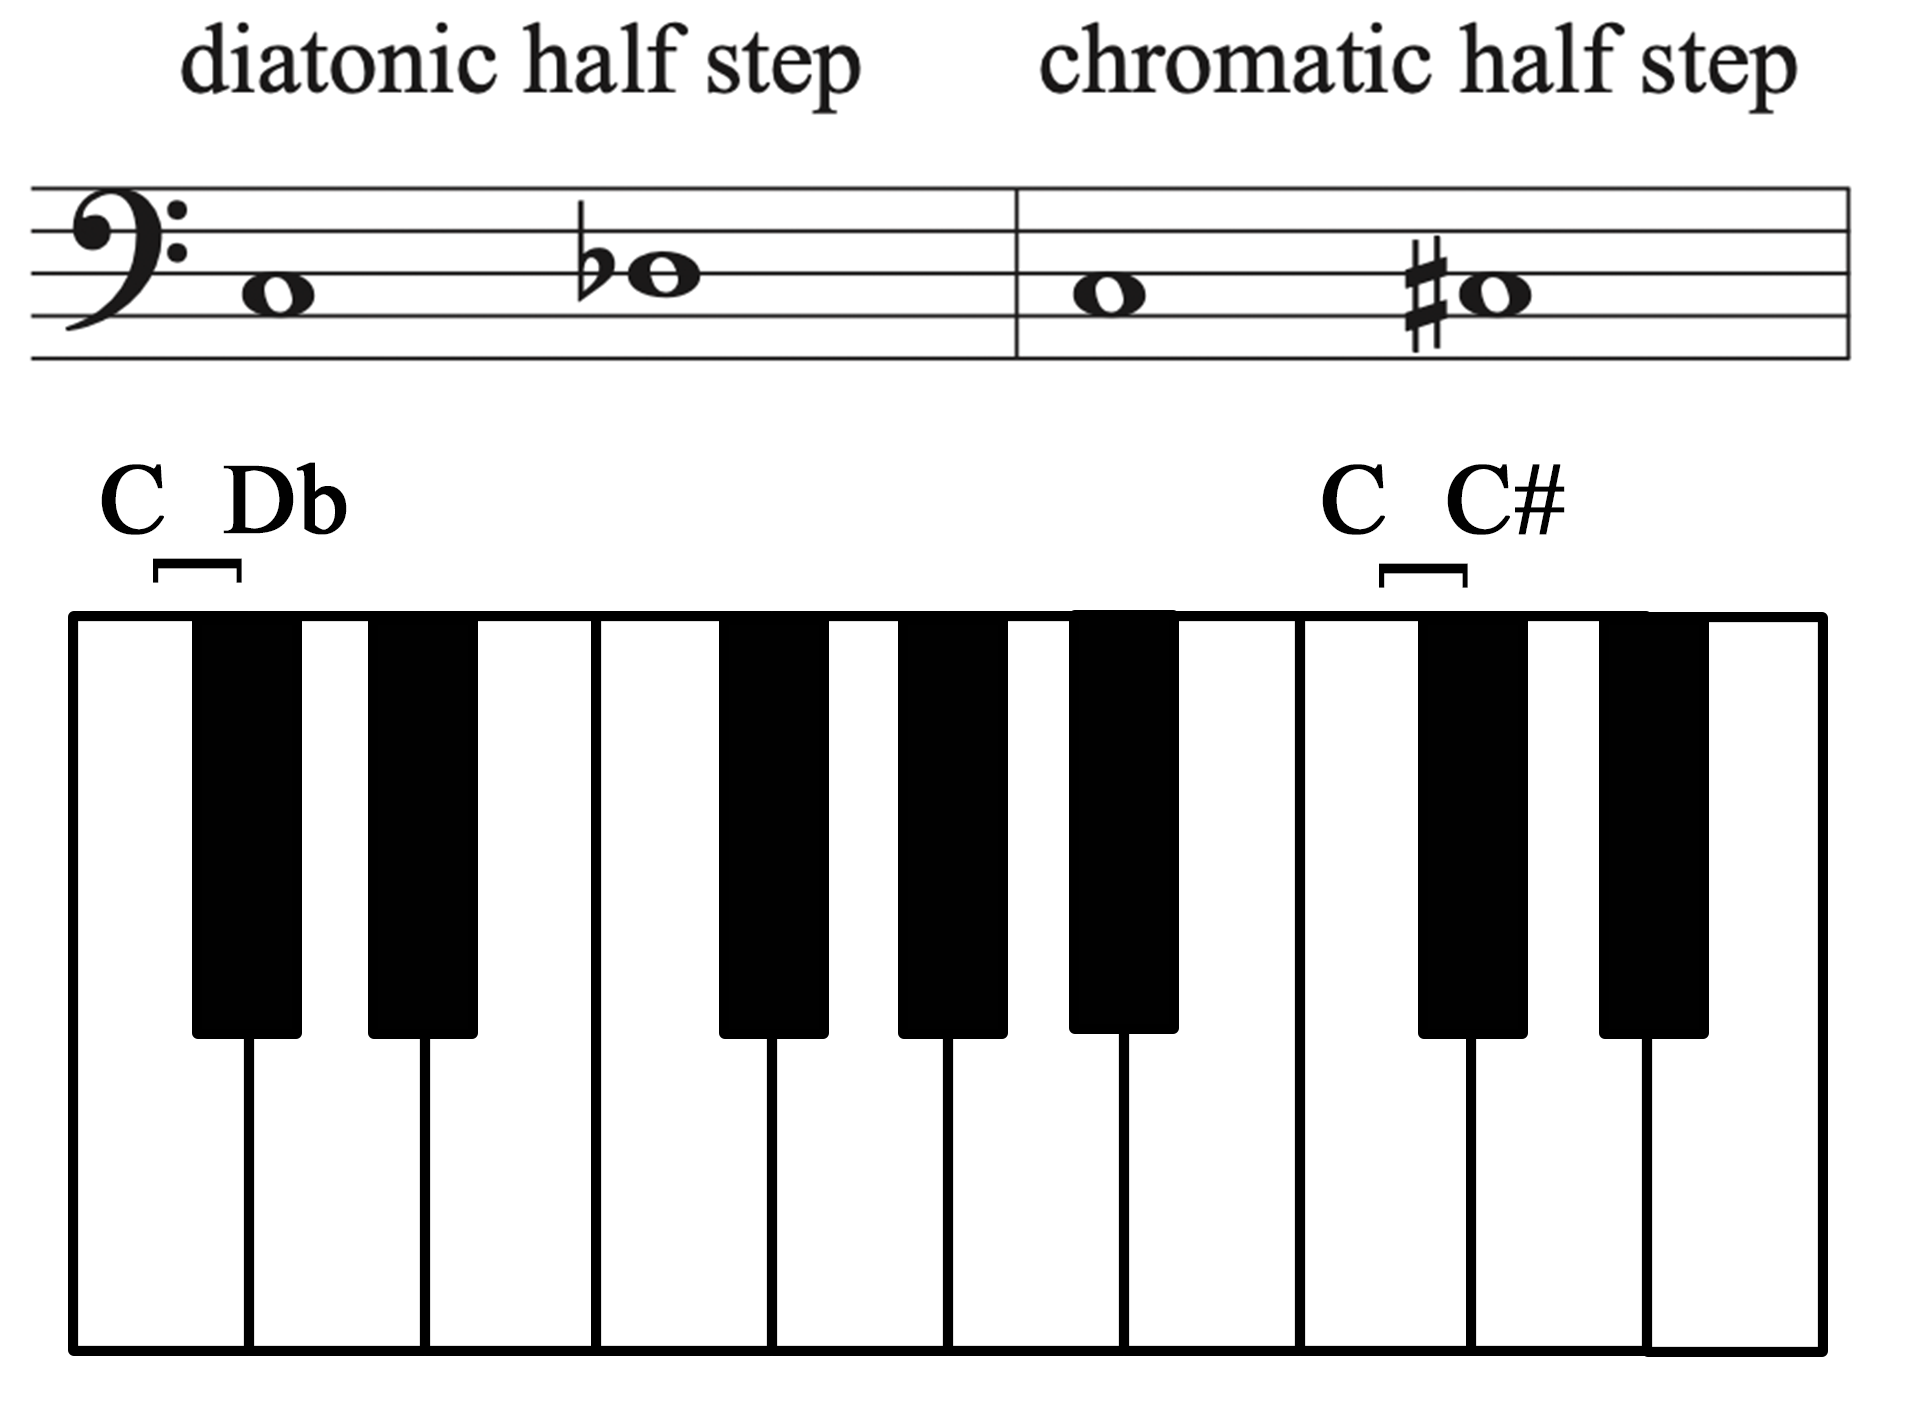 A keyboard with C to D-flat labeled as a diatonic half step, and C to C-sharp labeled as a chromatic half step and shown on a staff.